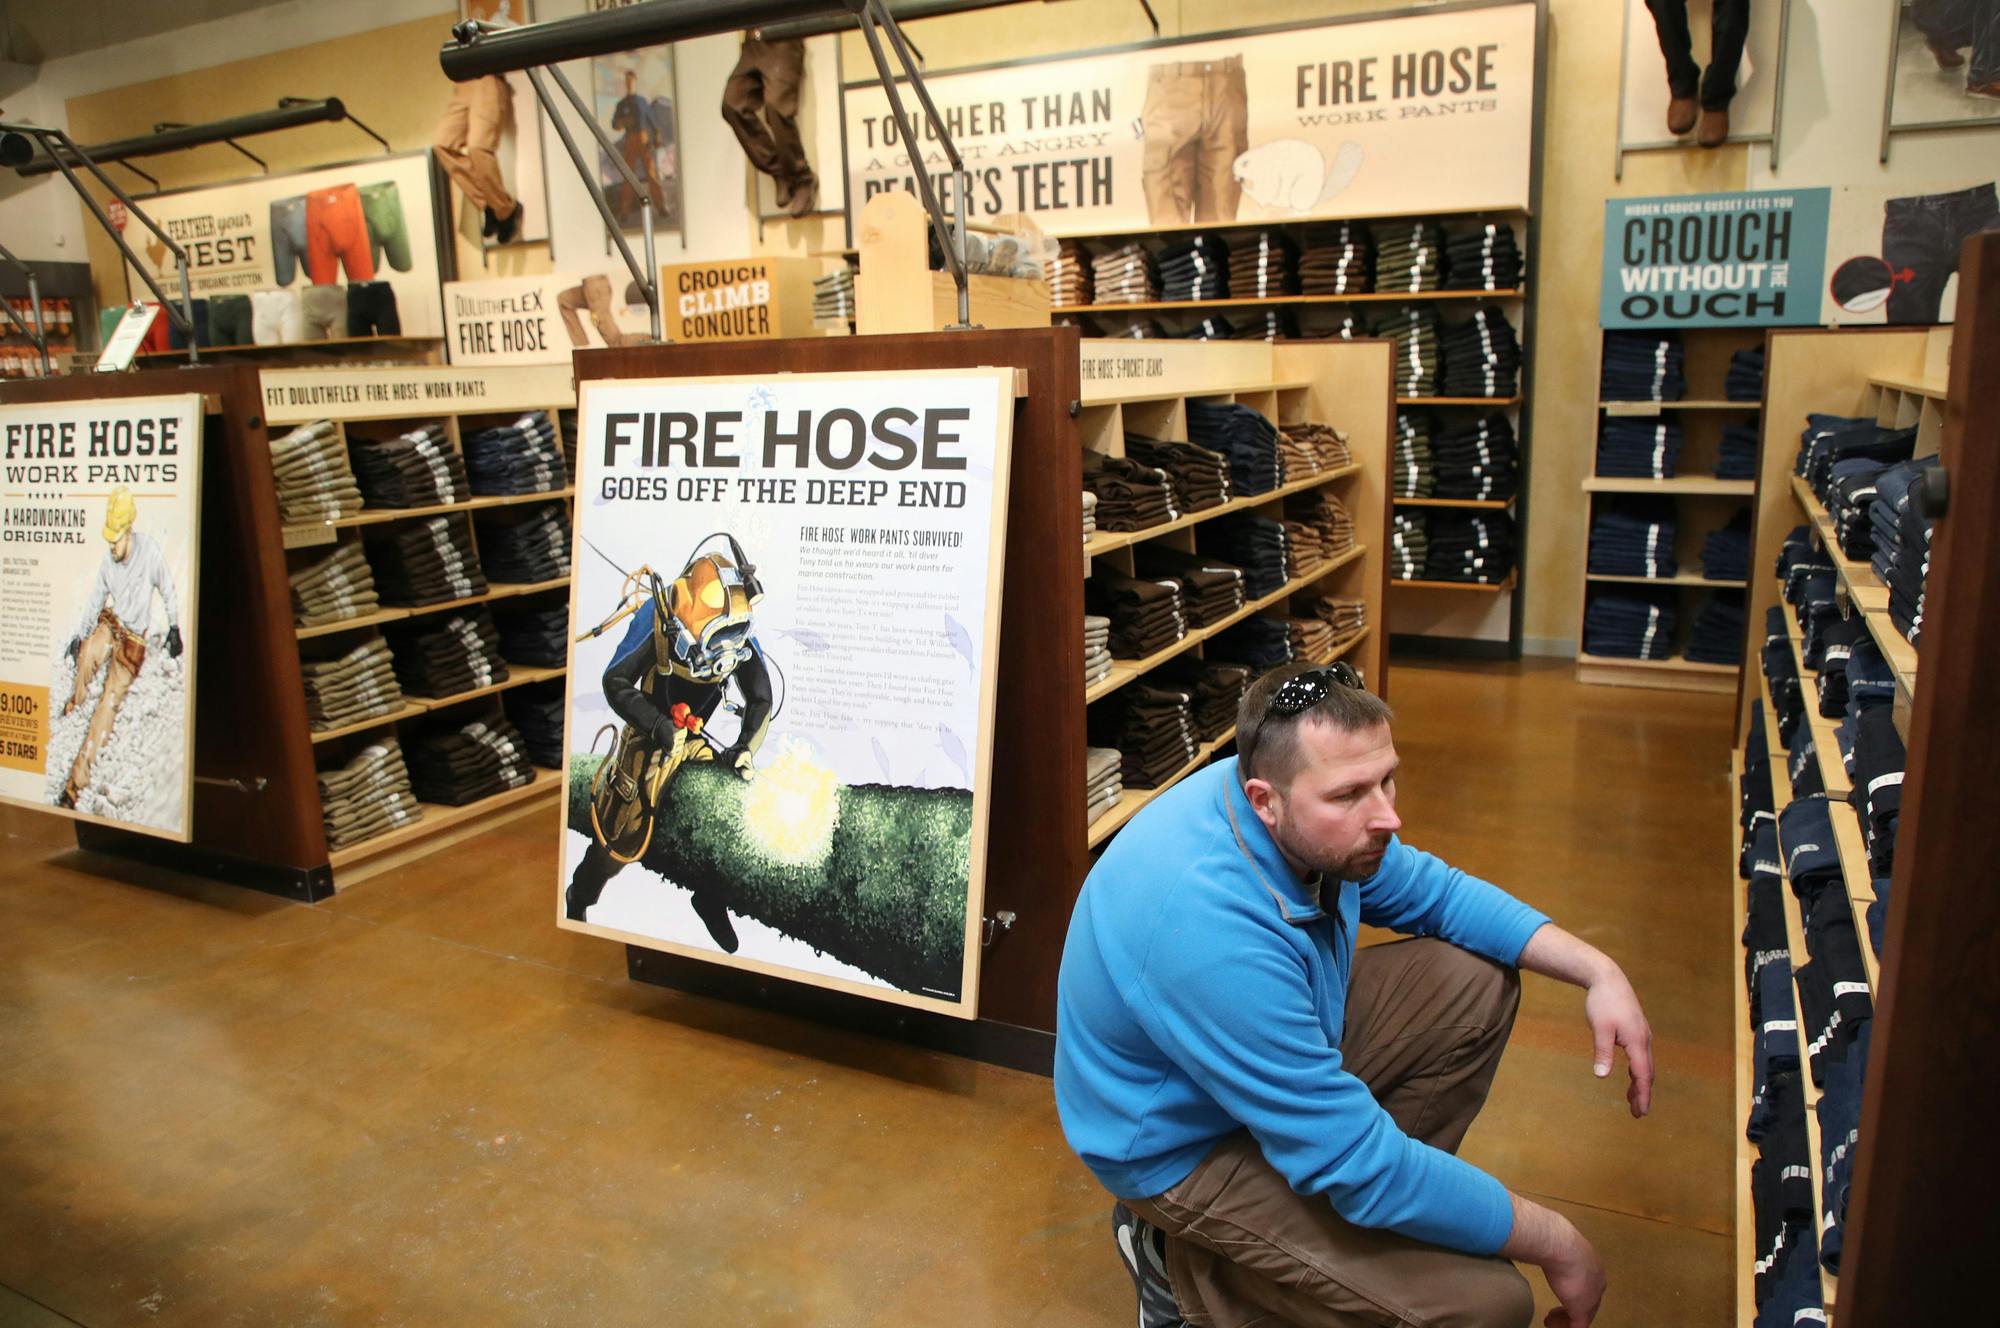 Duluth Trading Company eyeing expansion